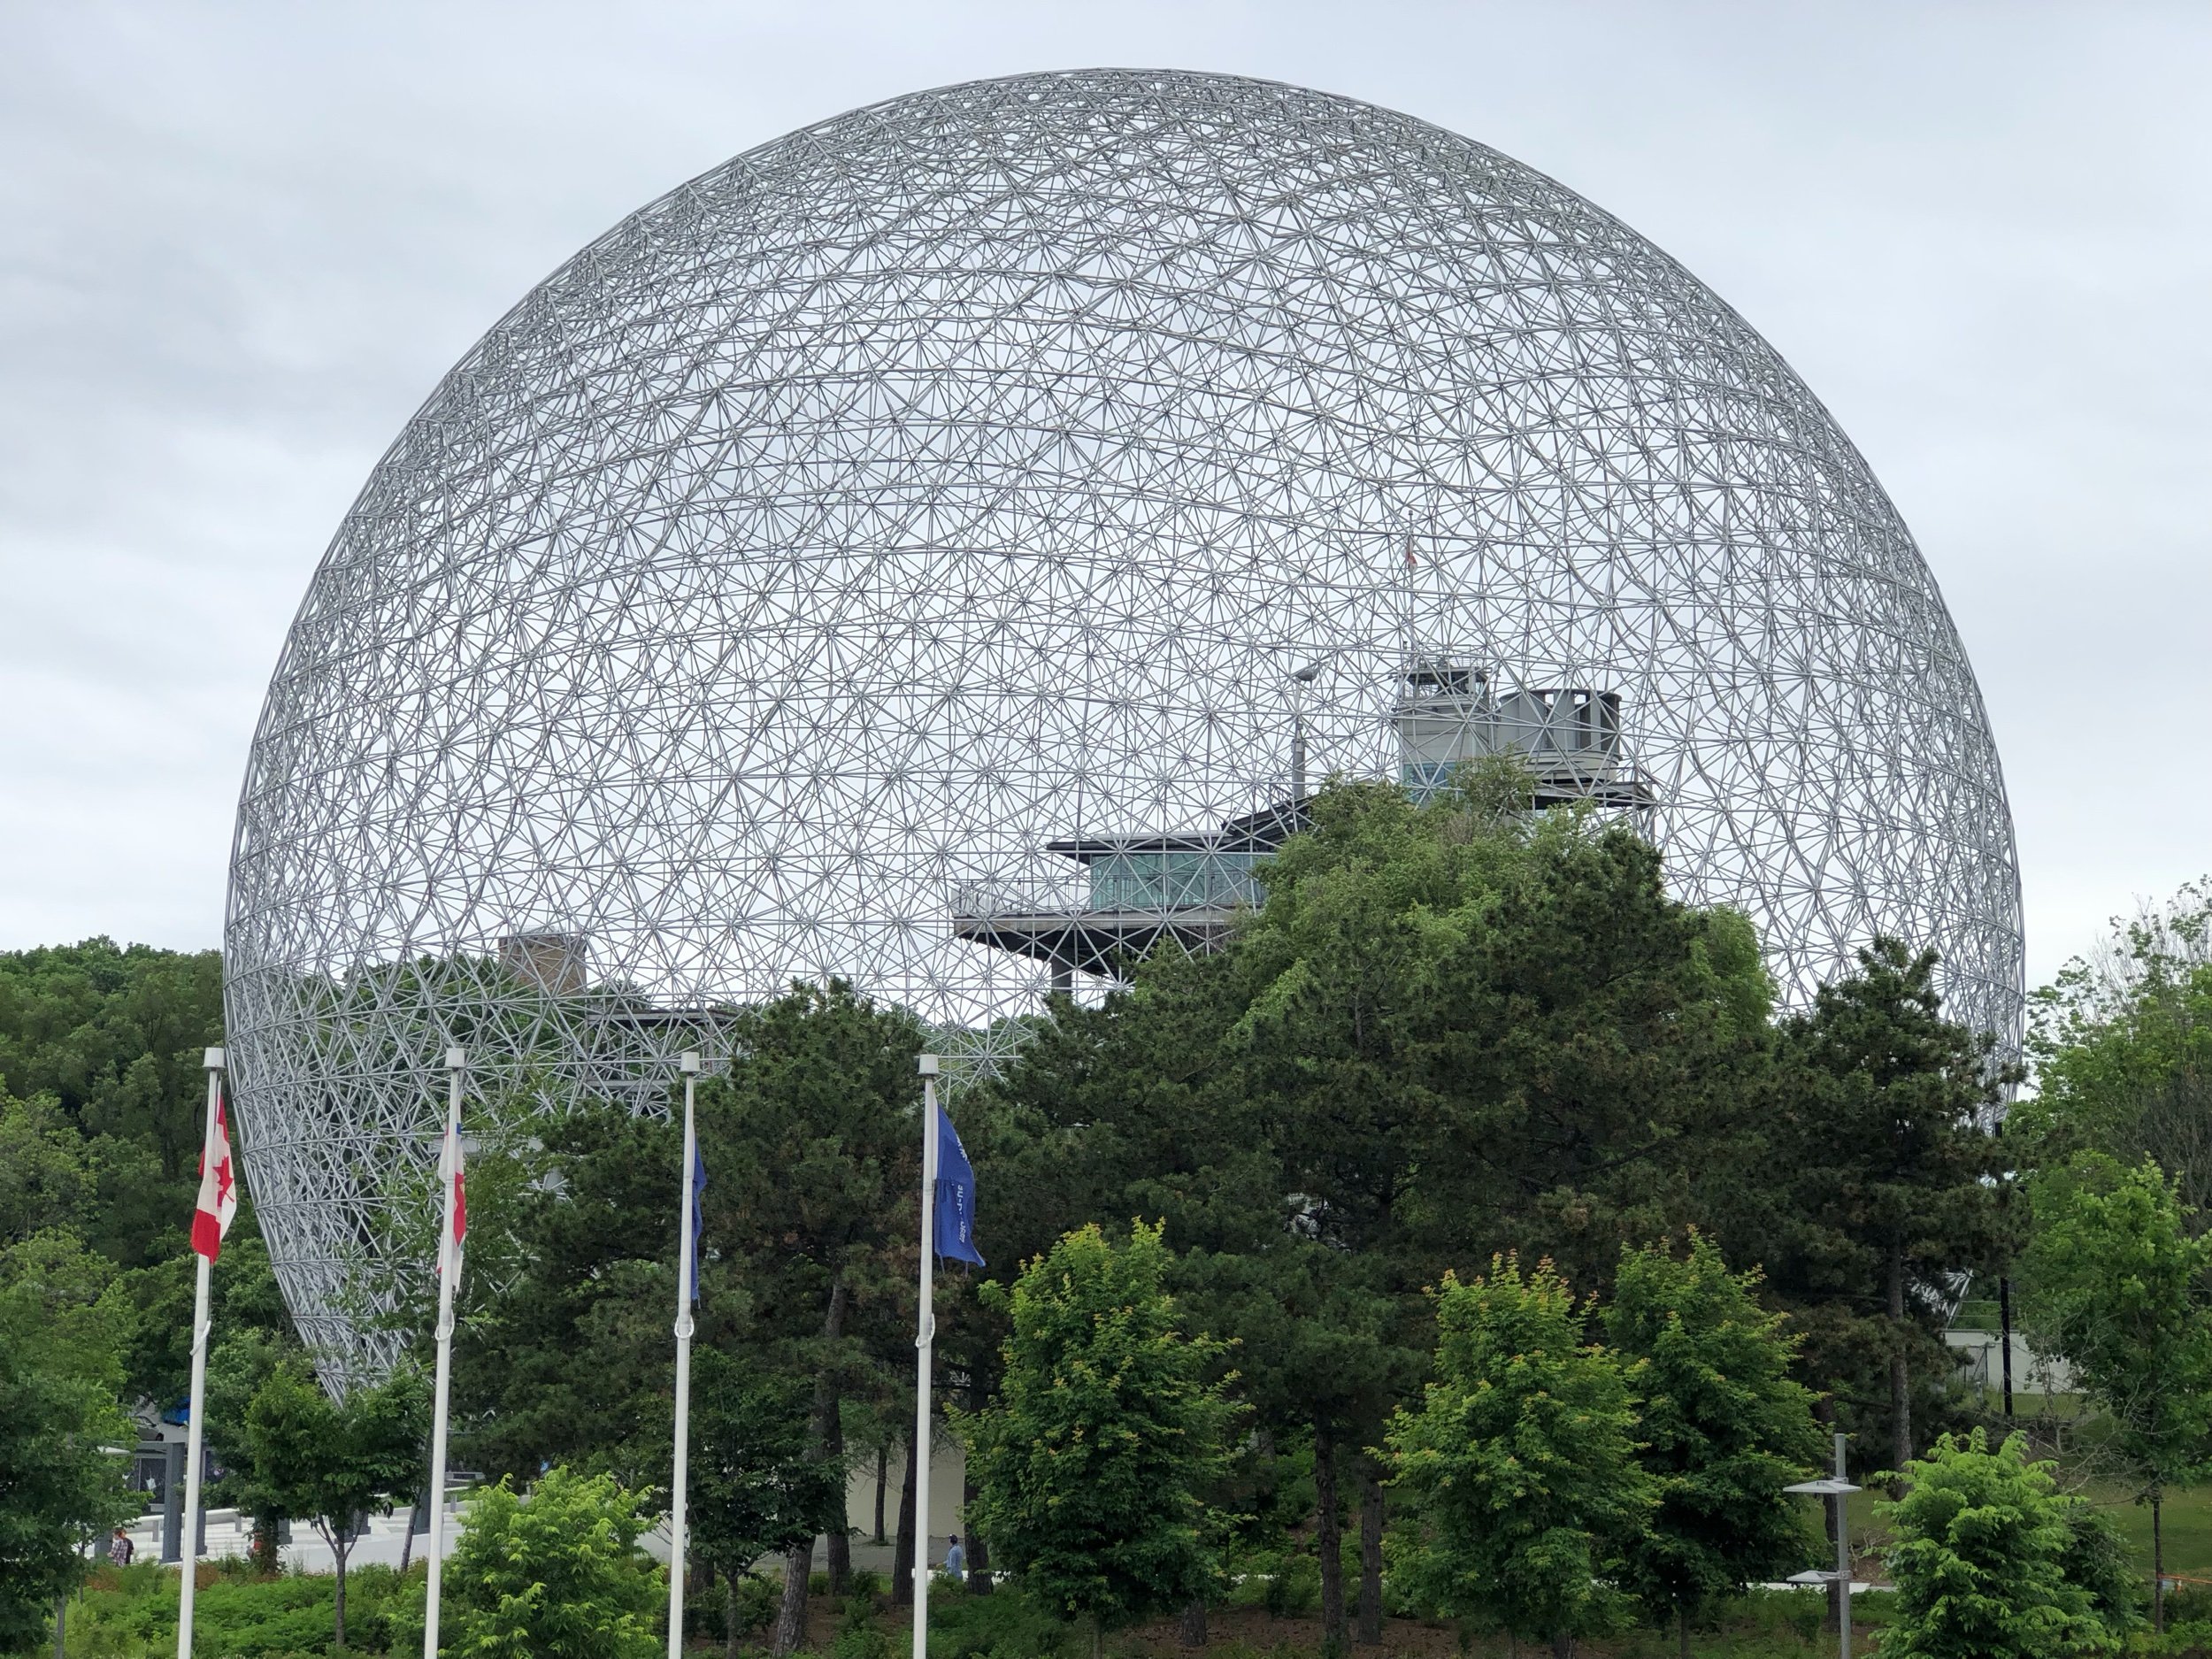  It did give a nice view of the old US pavilion from Expo 67, now an Environmental Museum. 